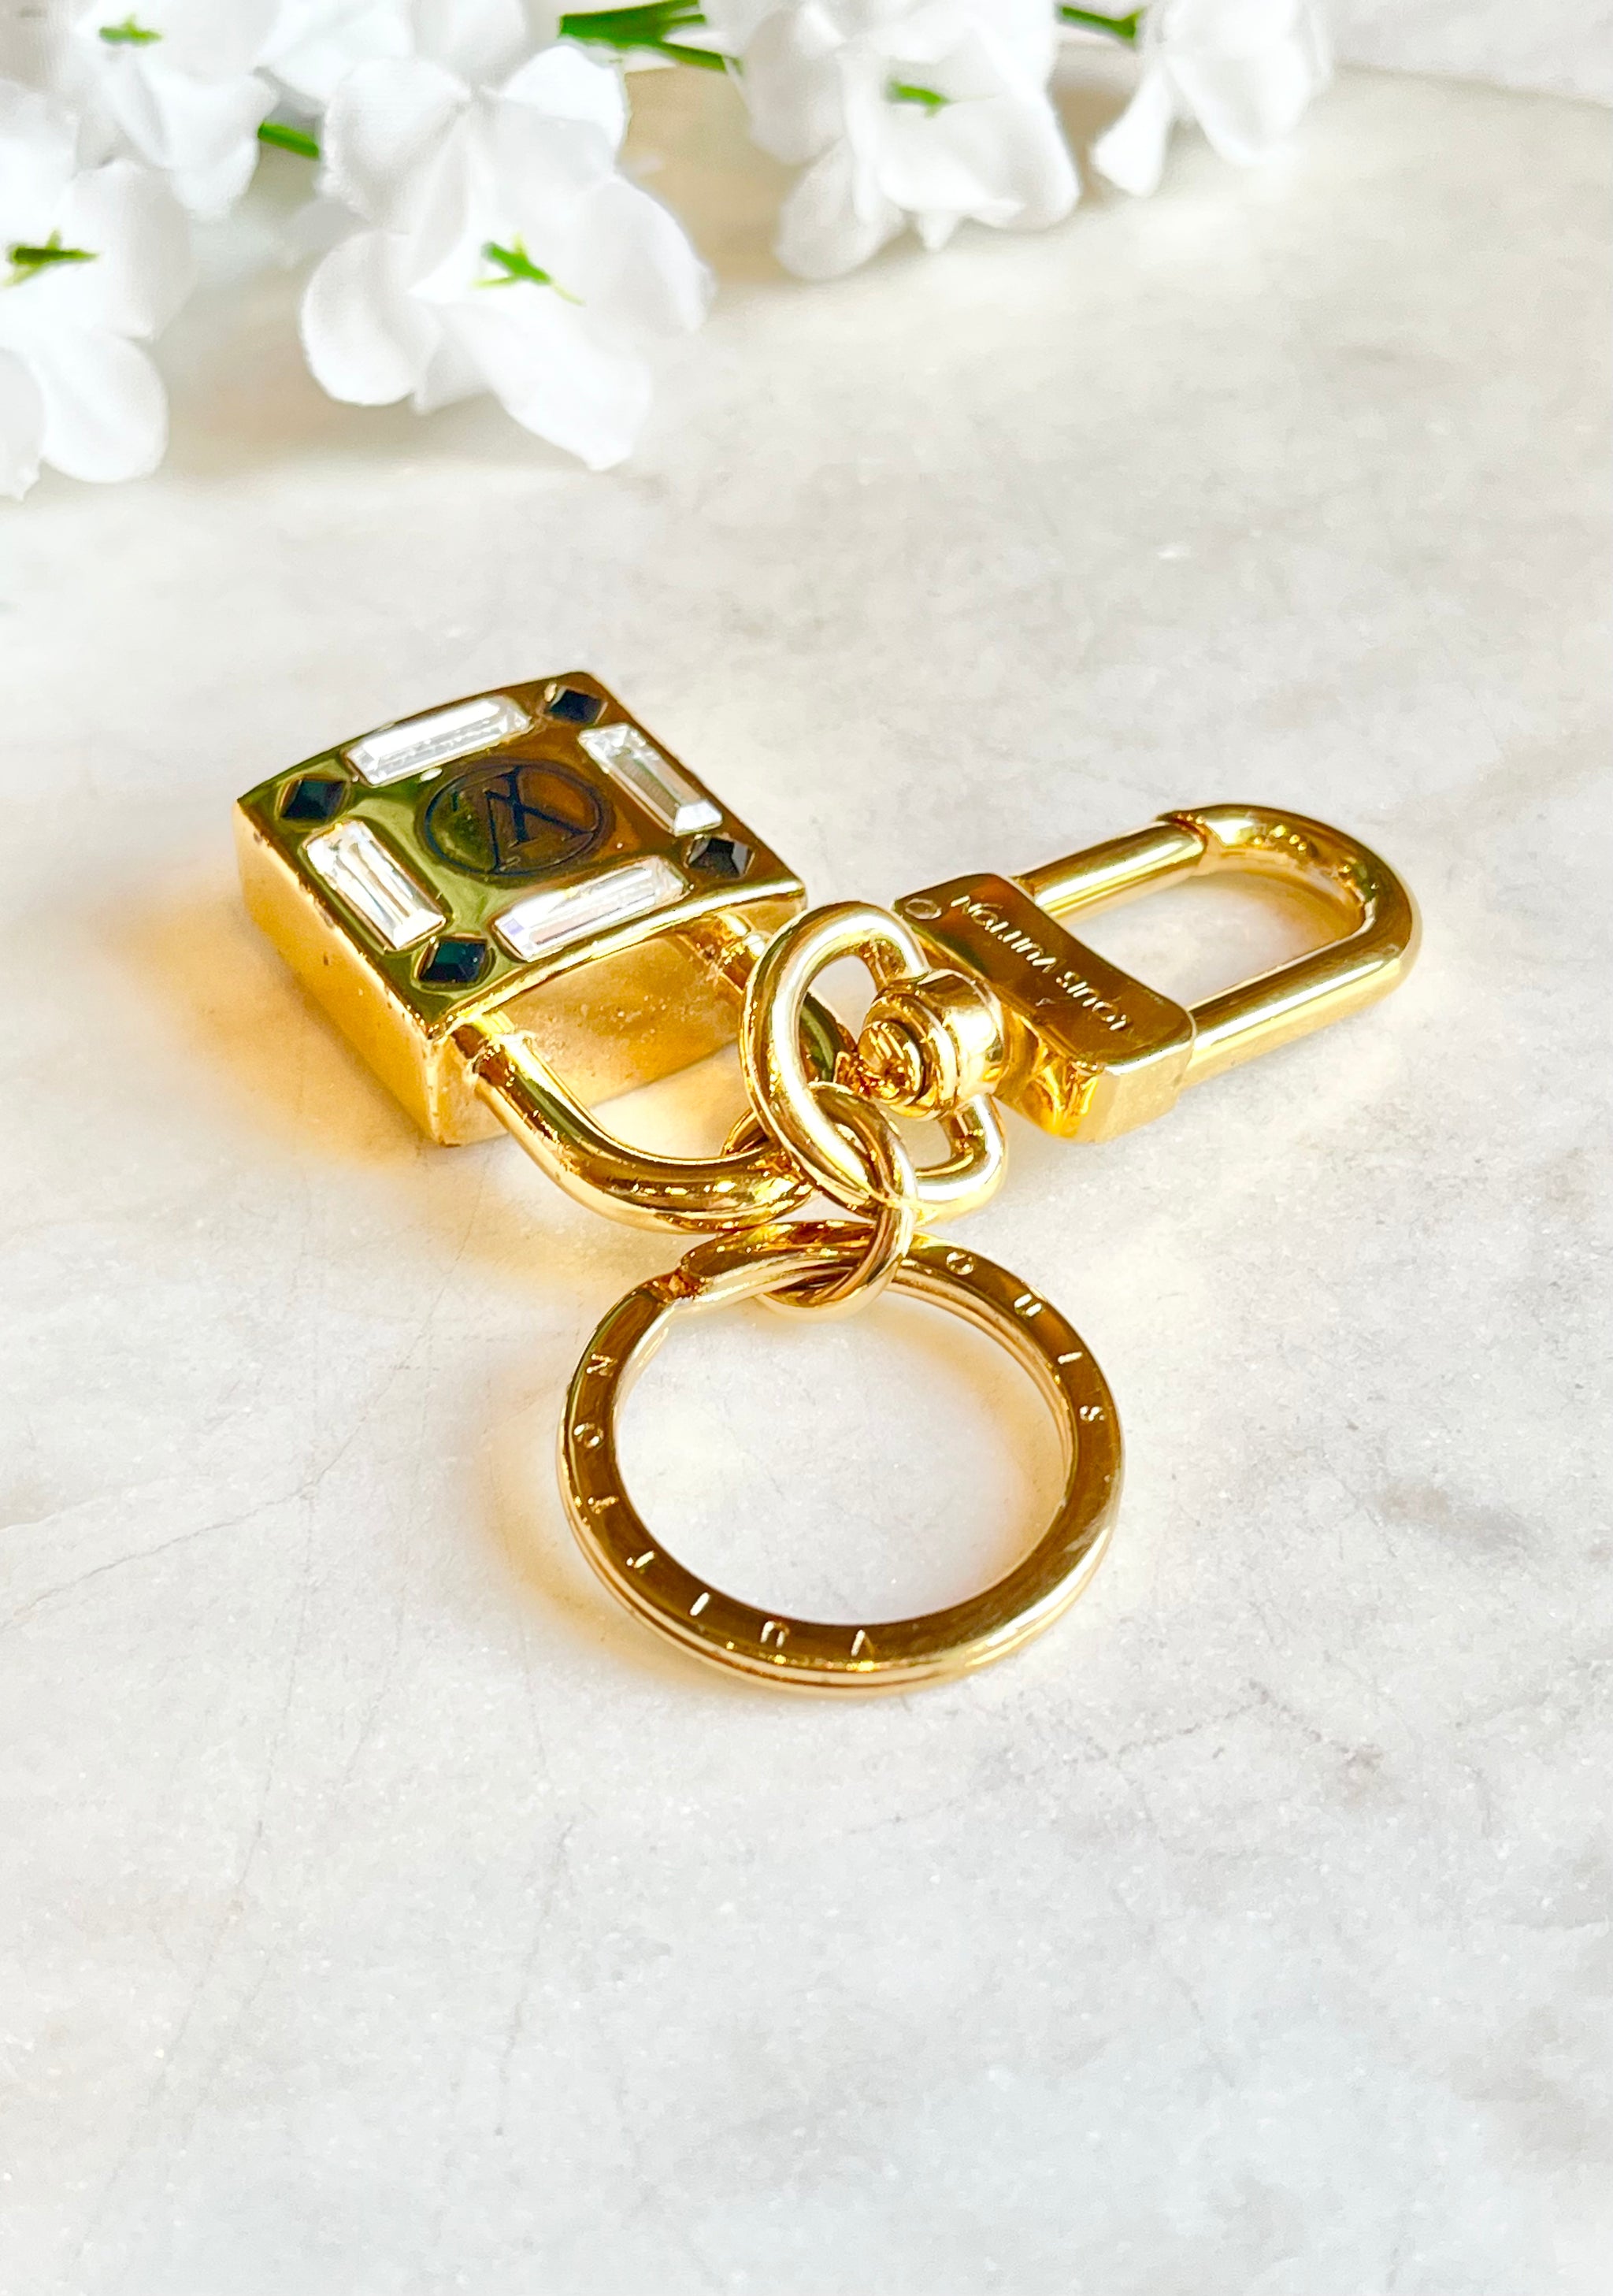 Louis Vuitton Goldtone and Black Crystal Key and Padlock Charm